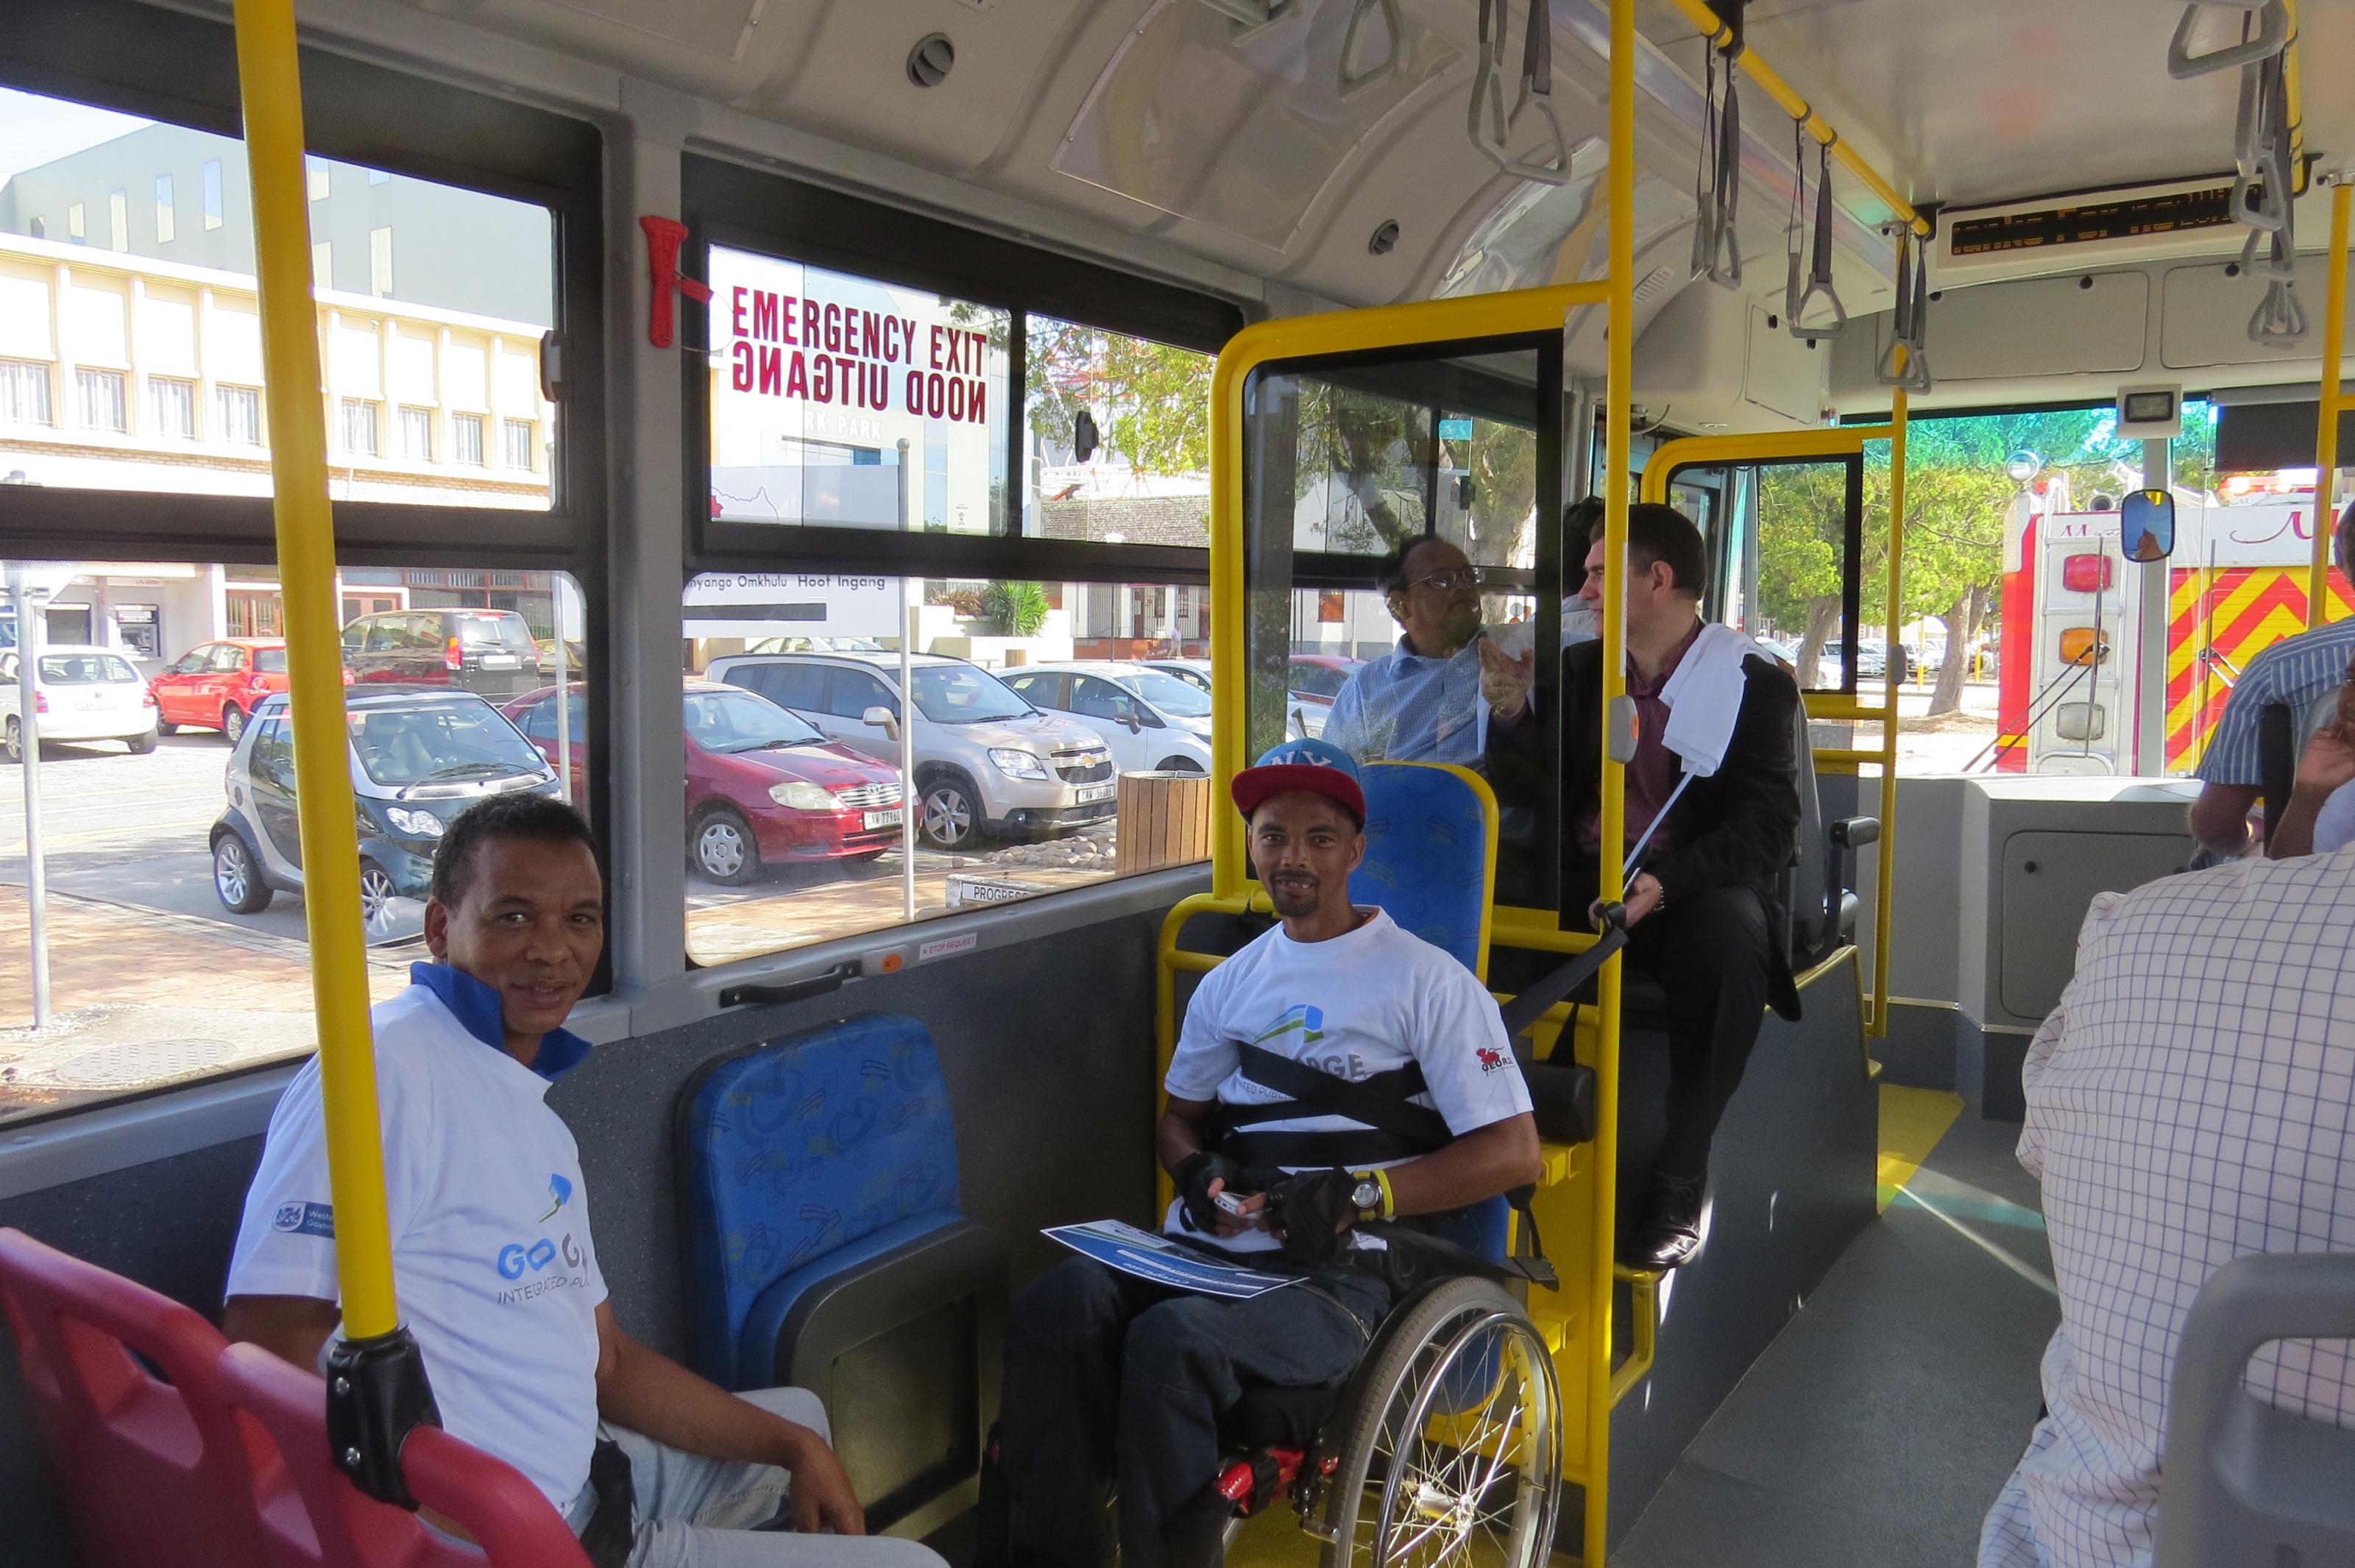 The buses provide services for people with disabilities.